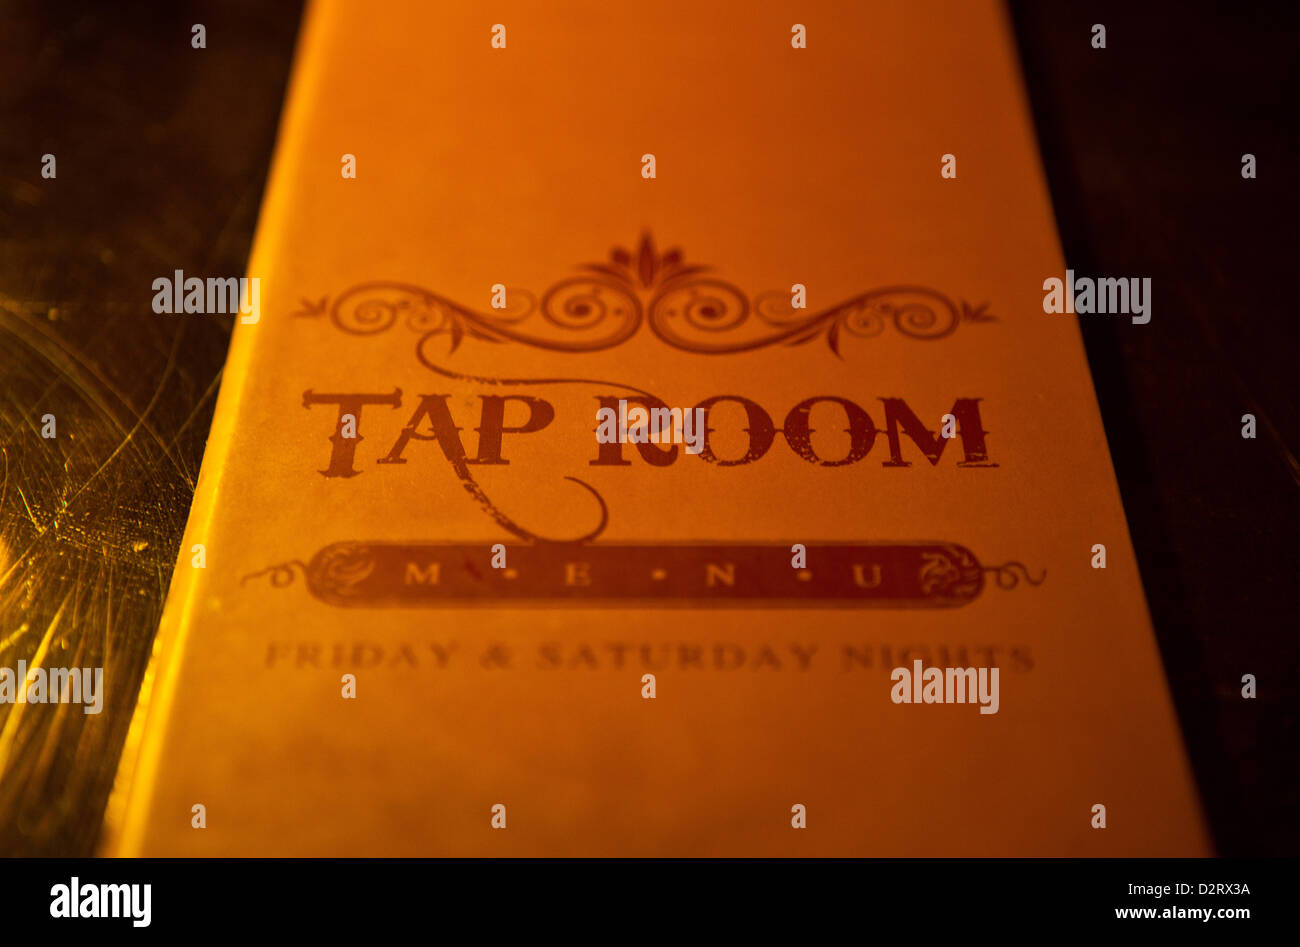 Tap Room Stock Photos Tap Room Stock Images Alamy